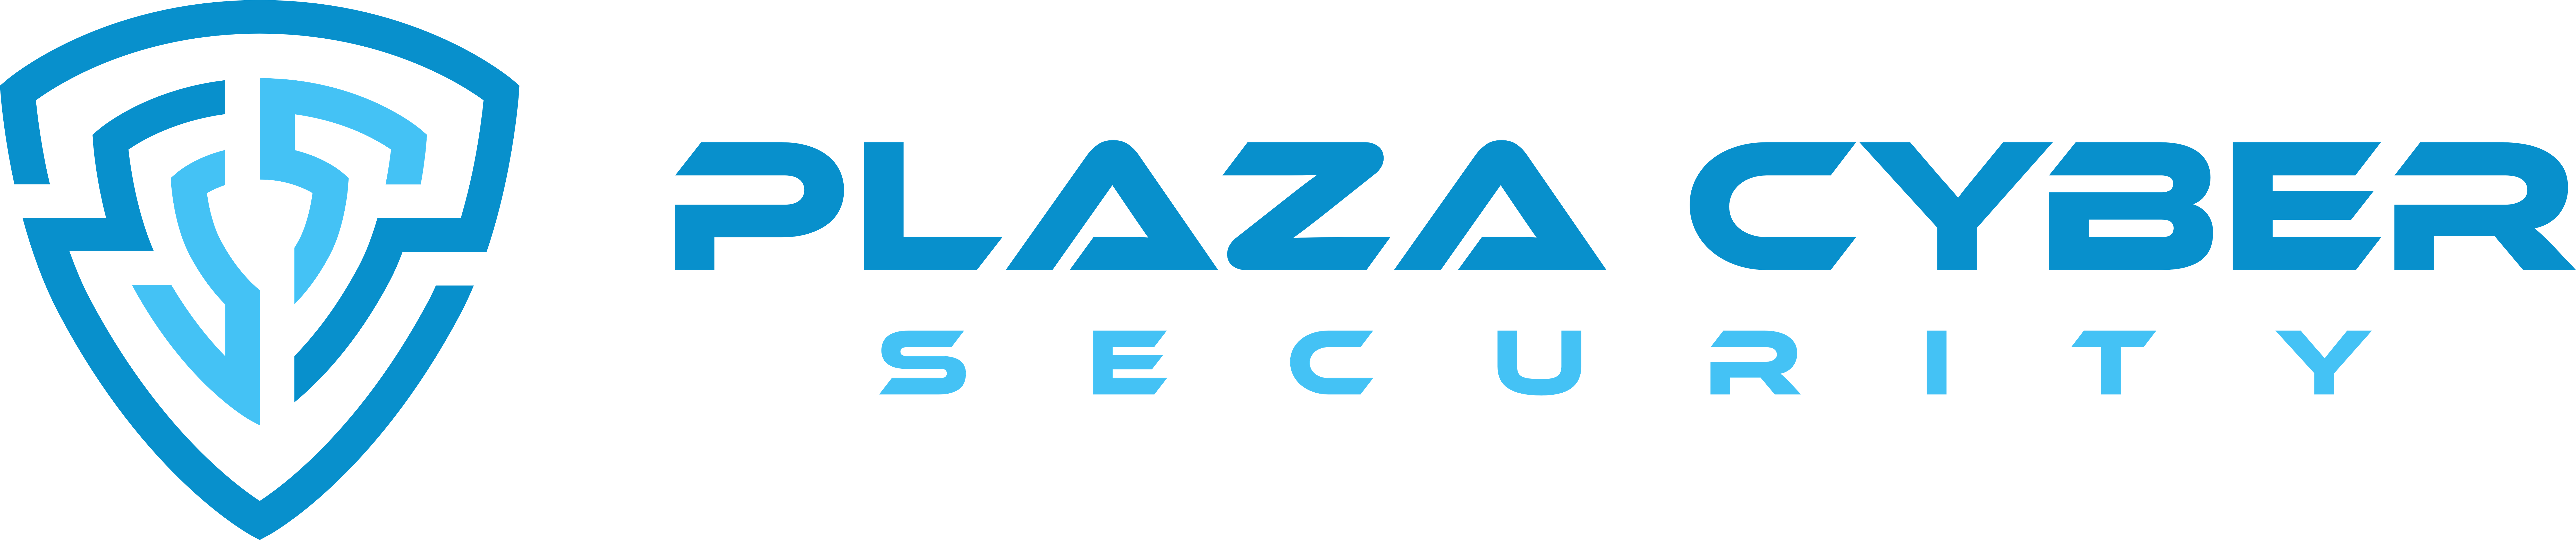 Plaza Cyber Security